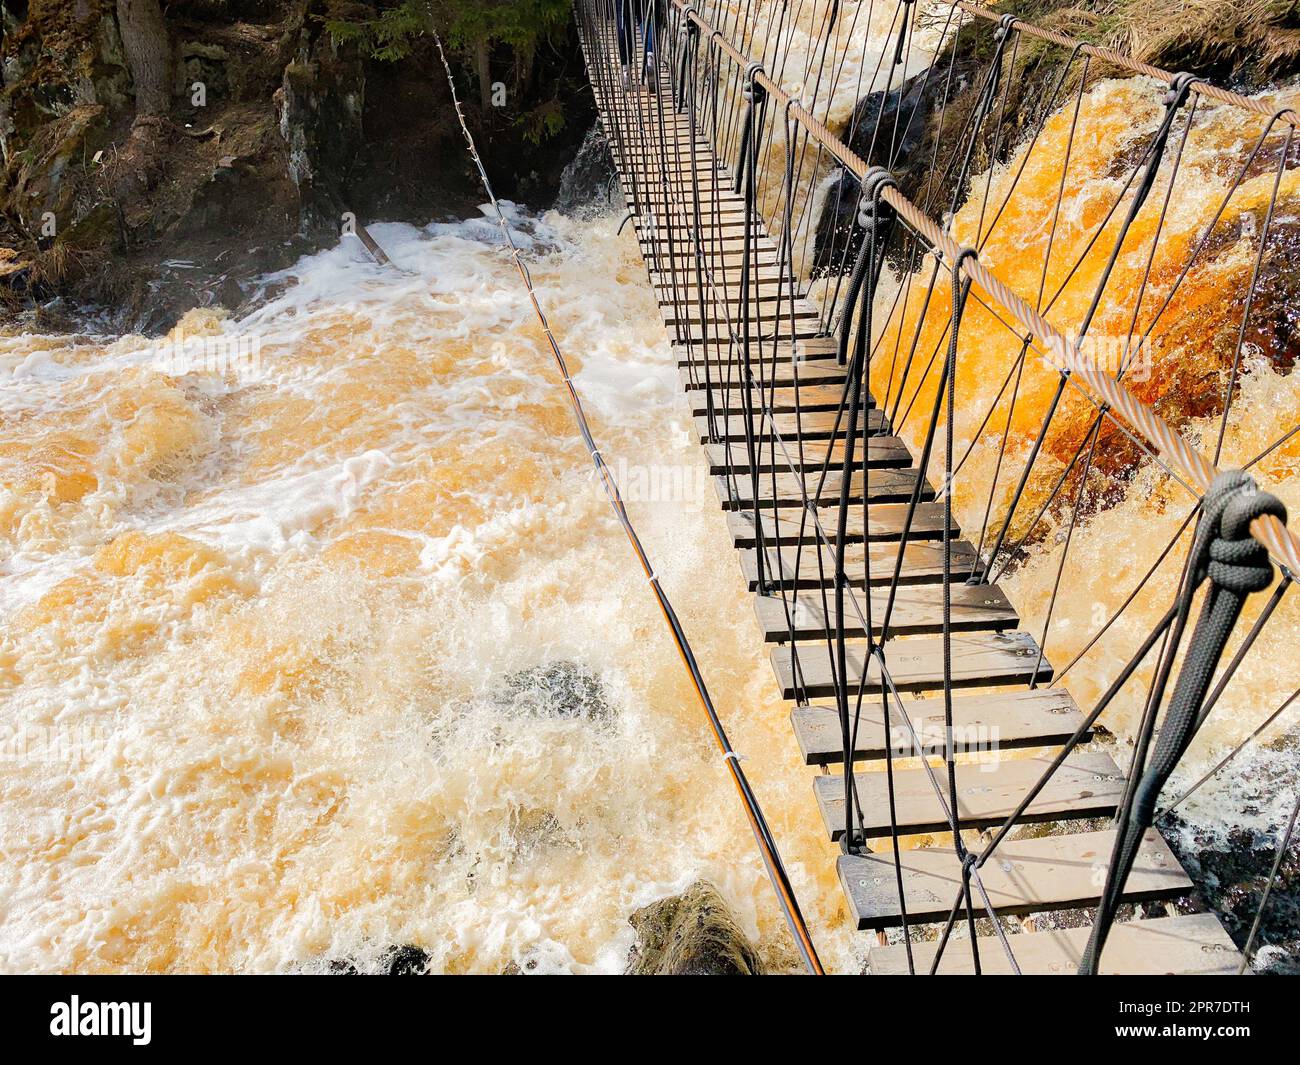 Above the fountain with yellow-brown water and protruding stones there is a rope wooden ladder Stock Photo